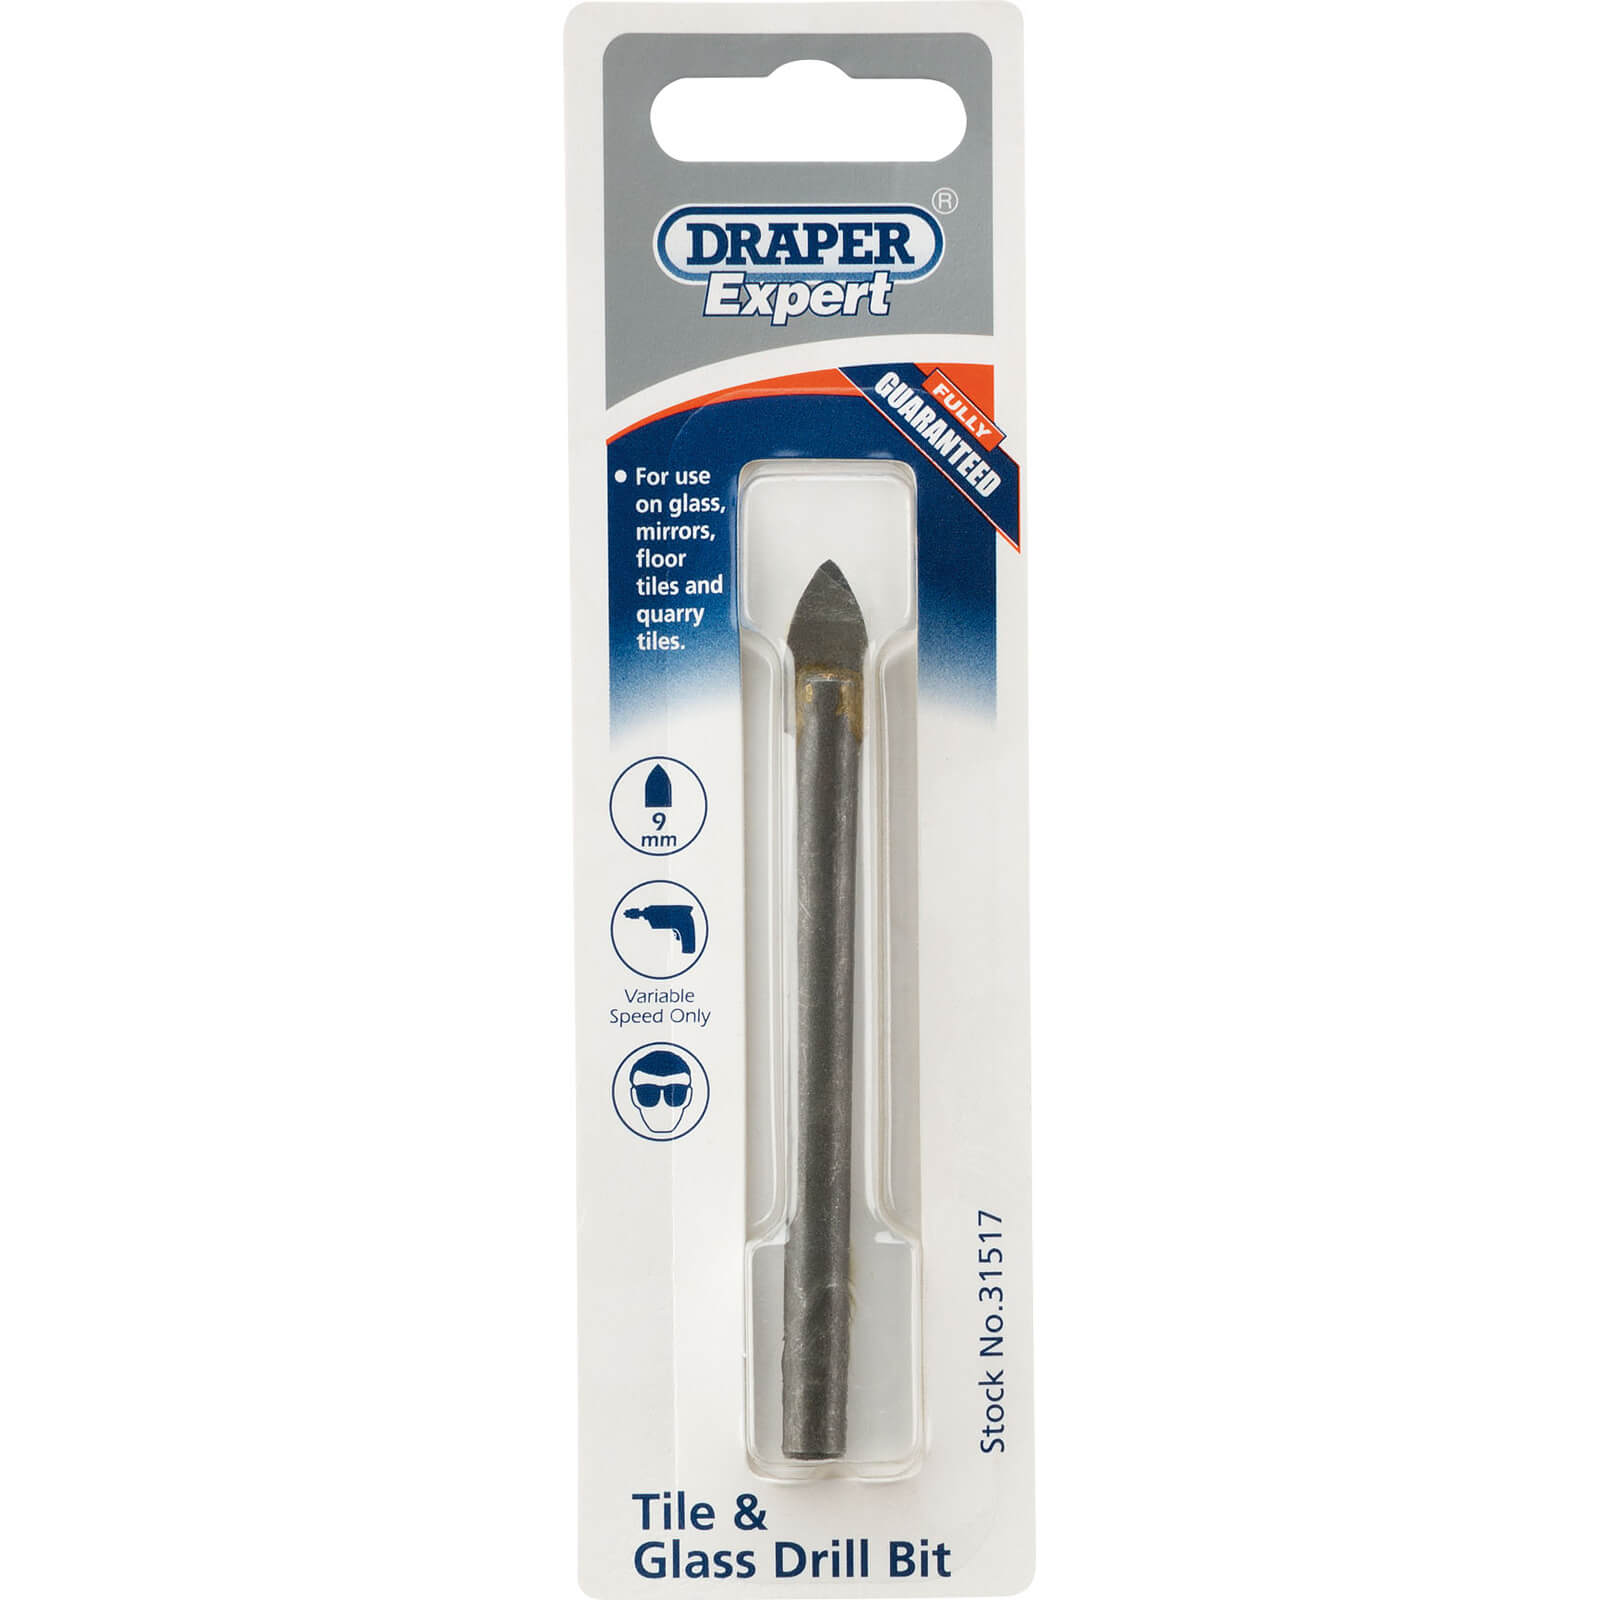 Photo of Draper Expert Tile And Glass Drill Bit 9mm